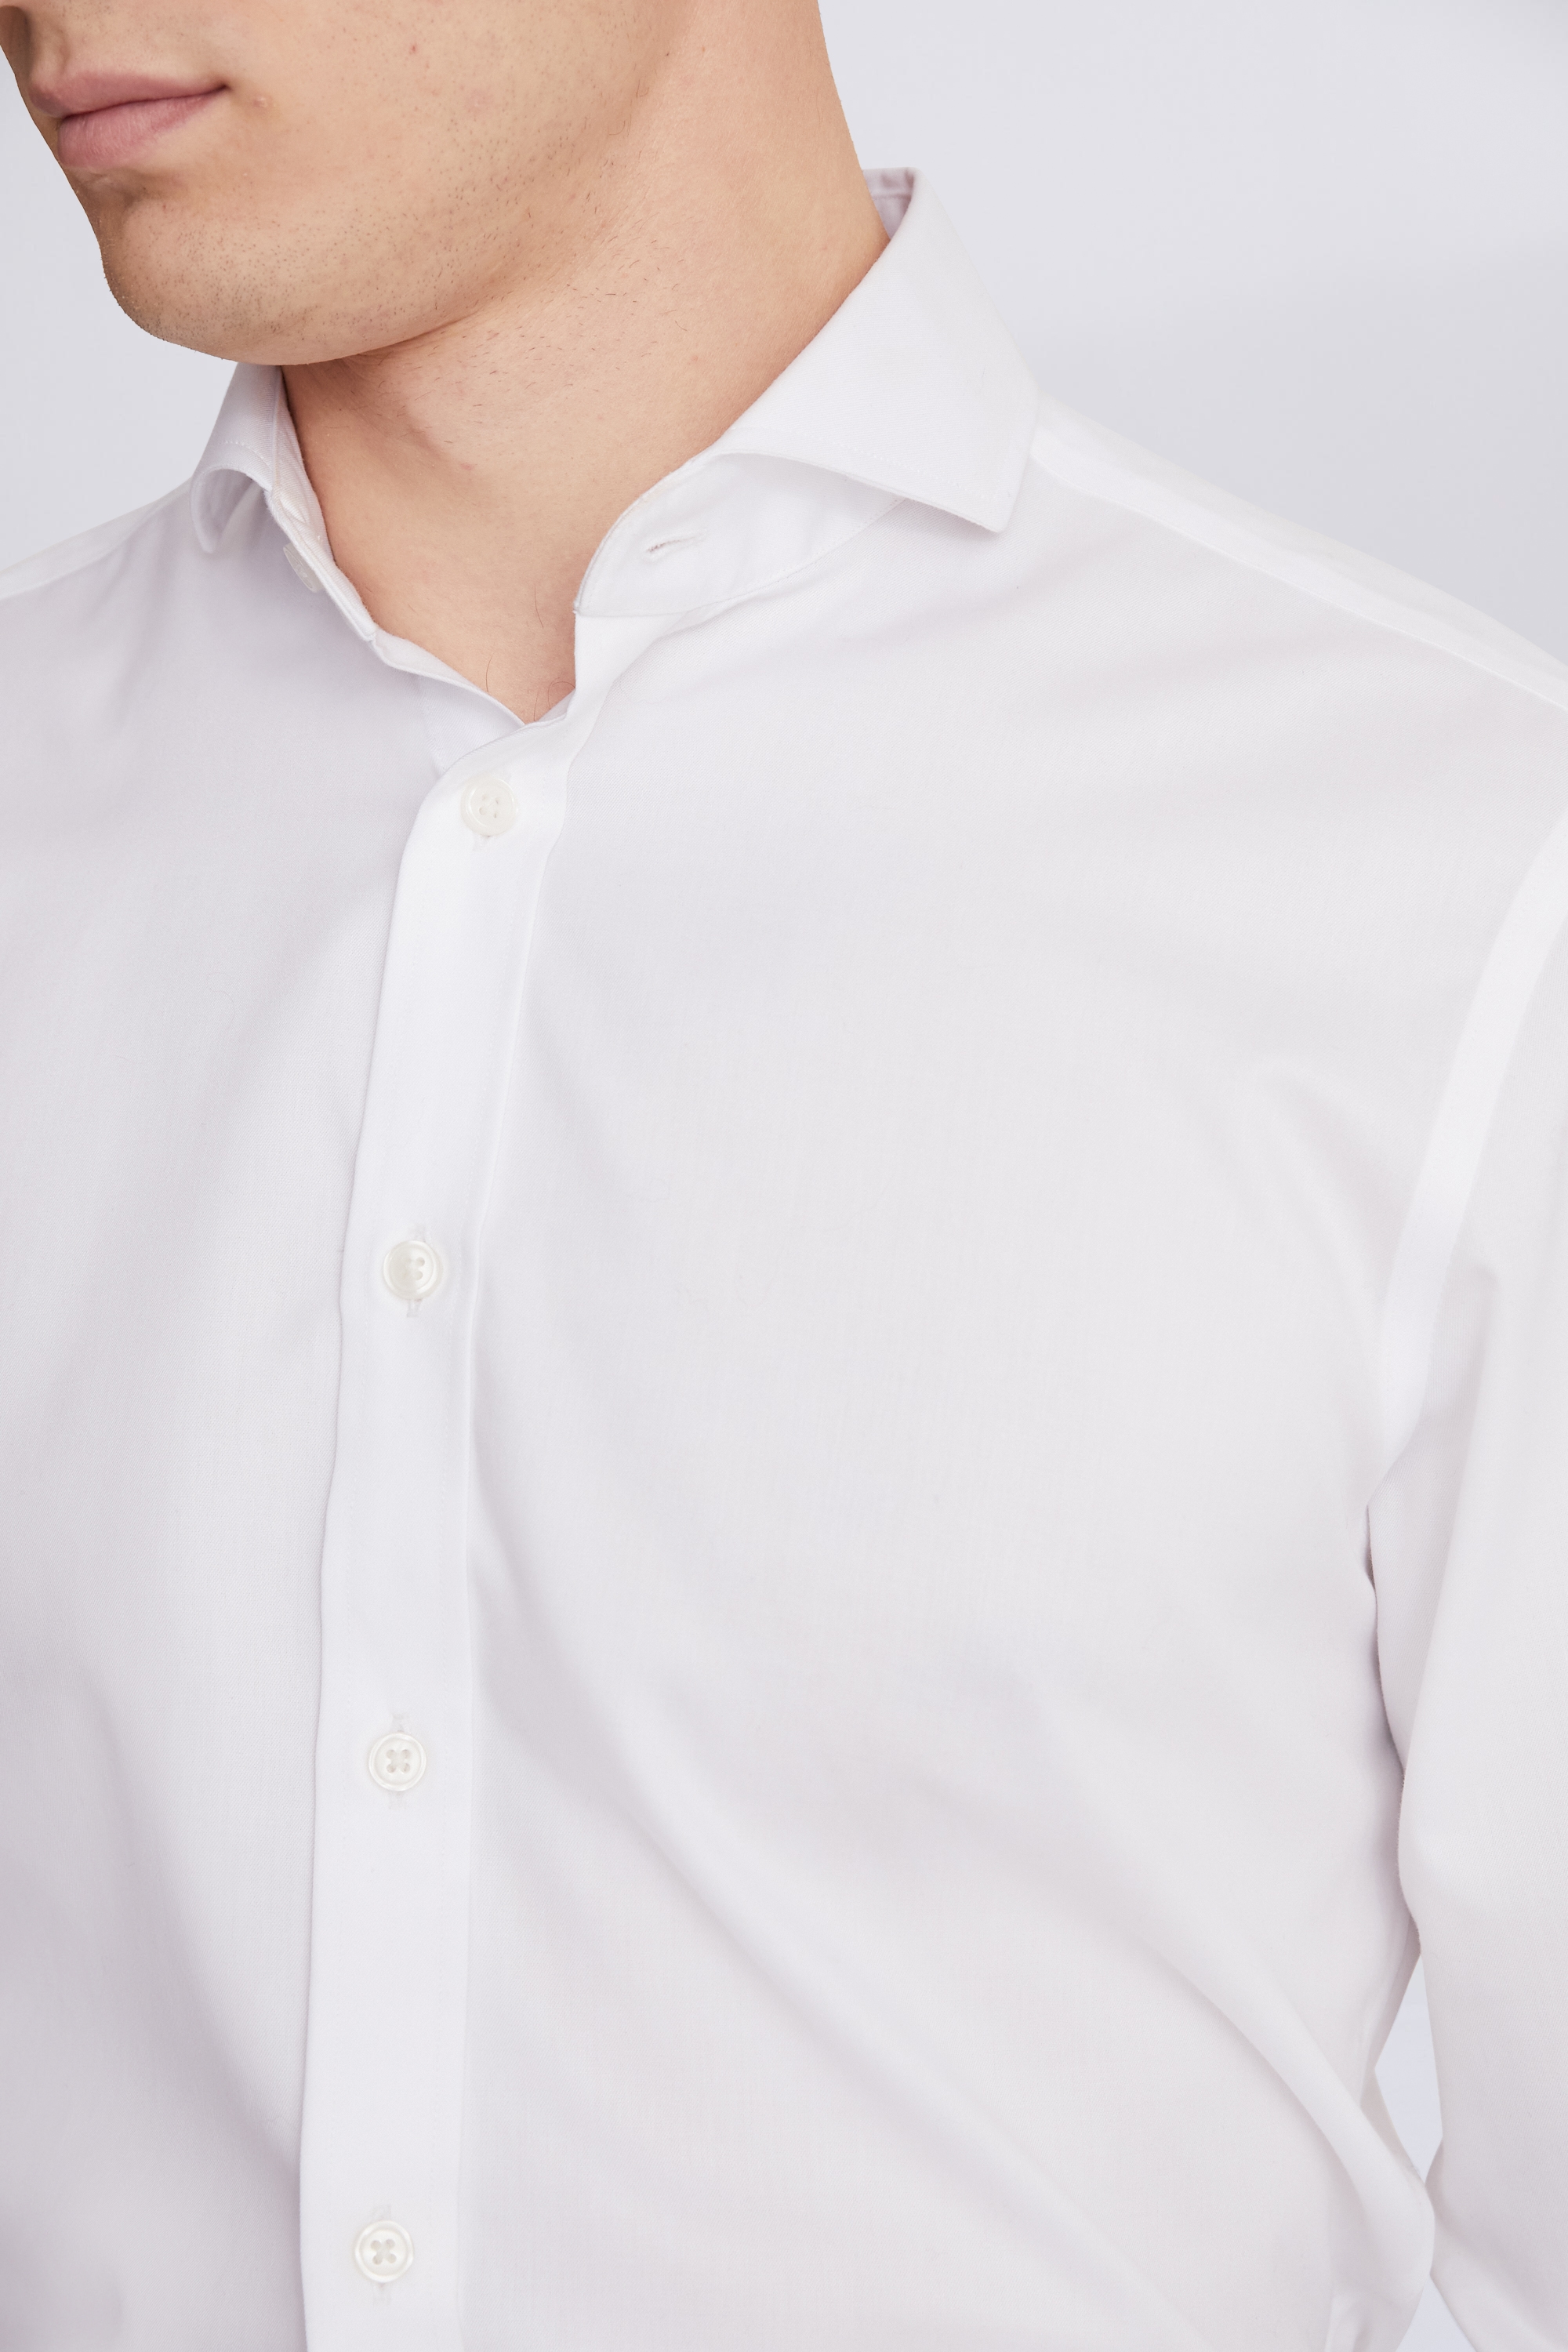 Tailored Fit White Non-Iron Twill Shirt | Buy Online at Moss